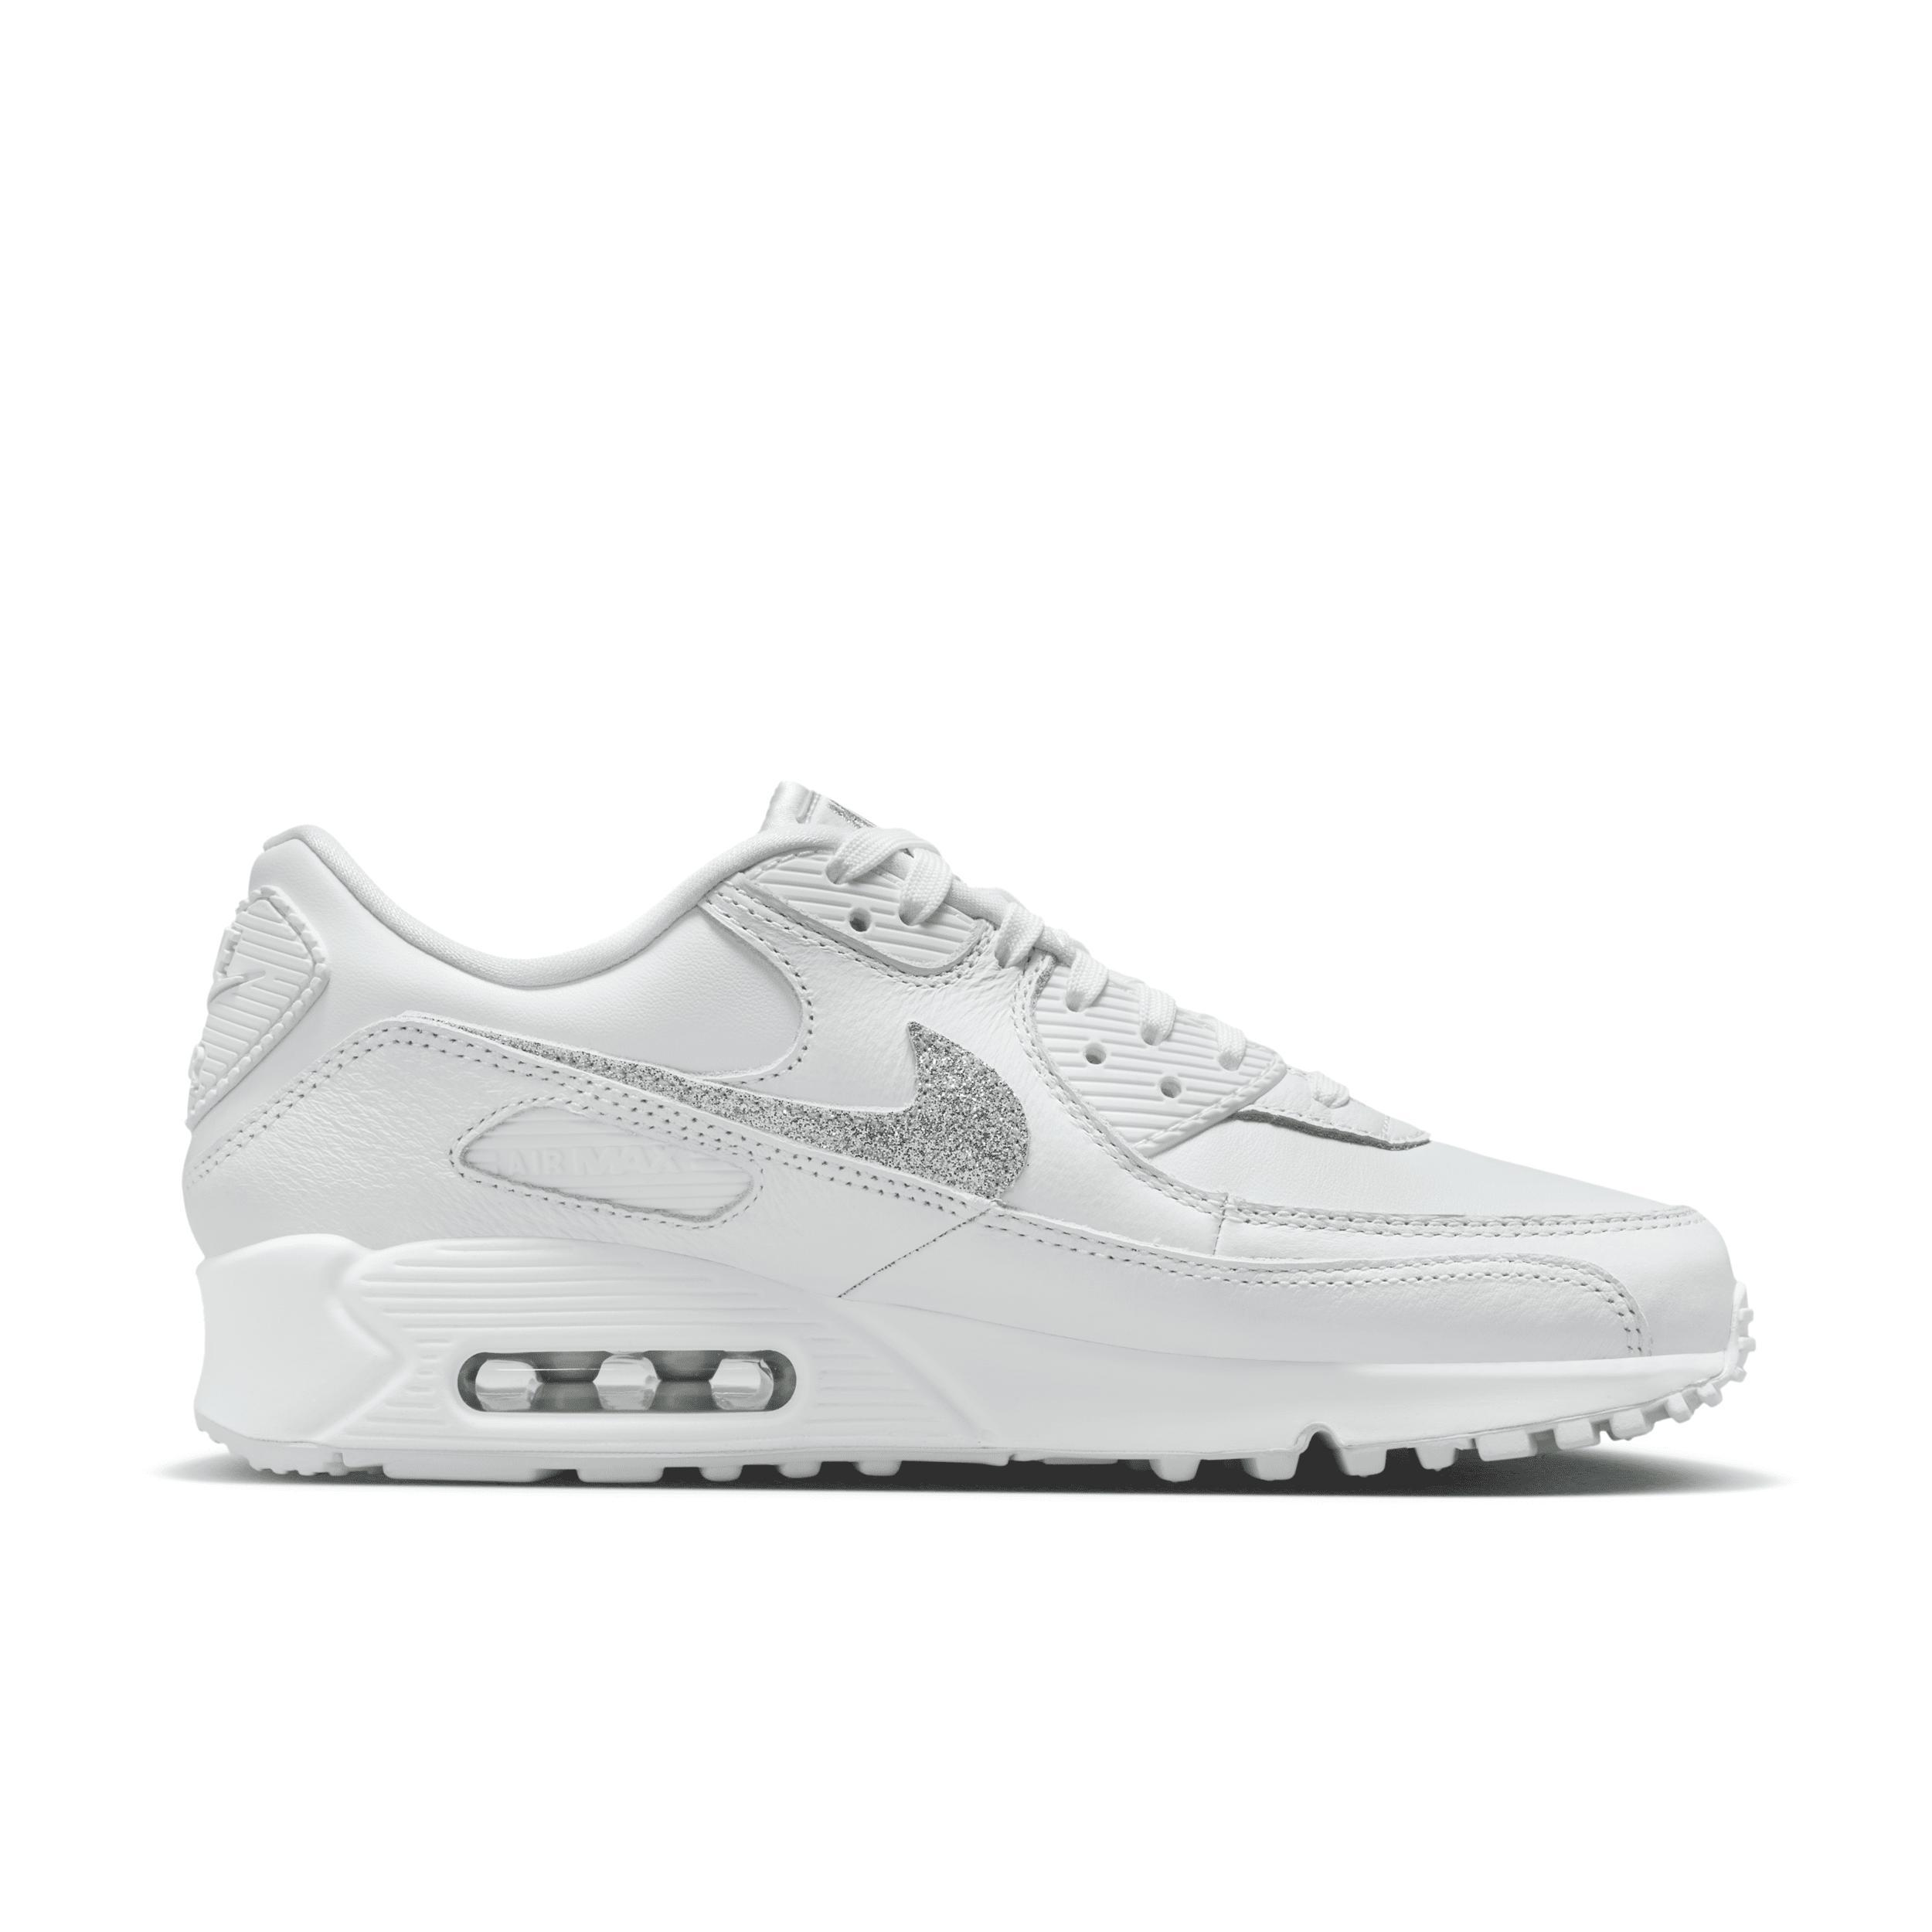 Nike Women's Air Max 90 SE Shoes Product Image